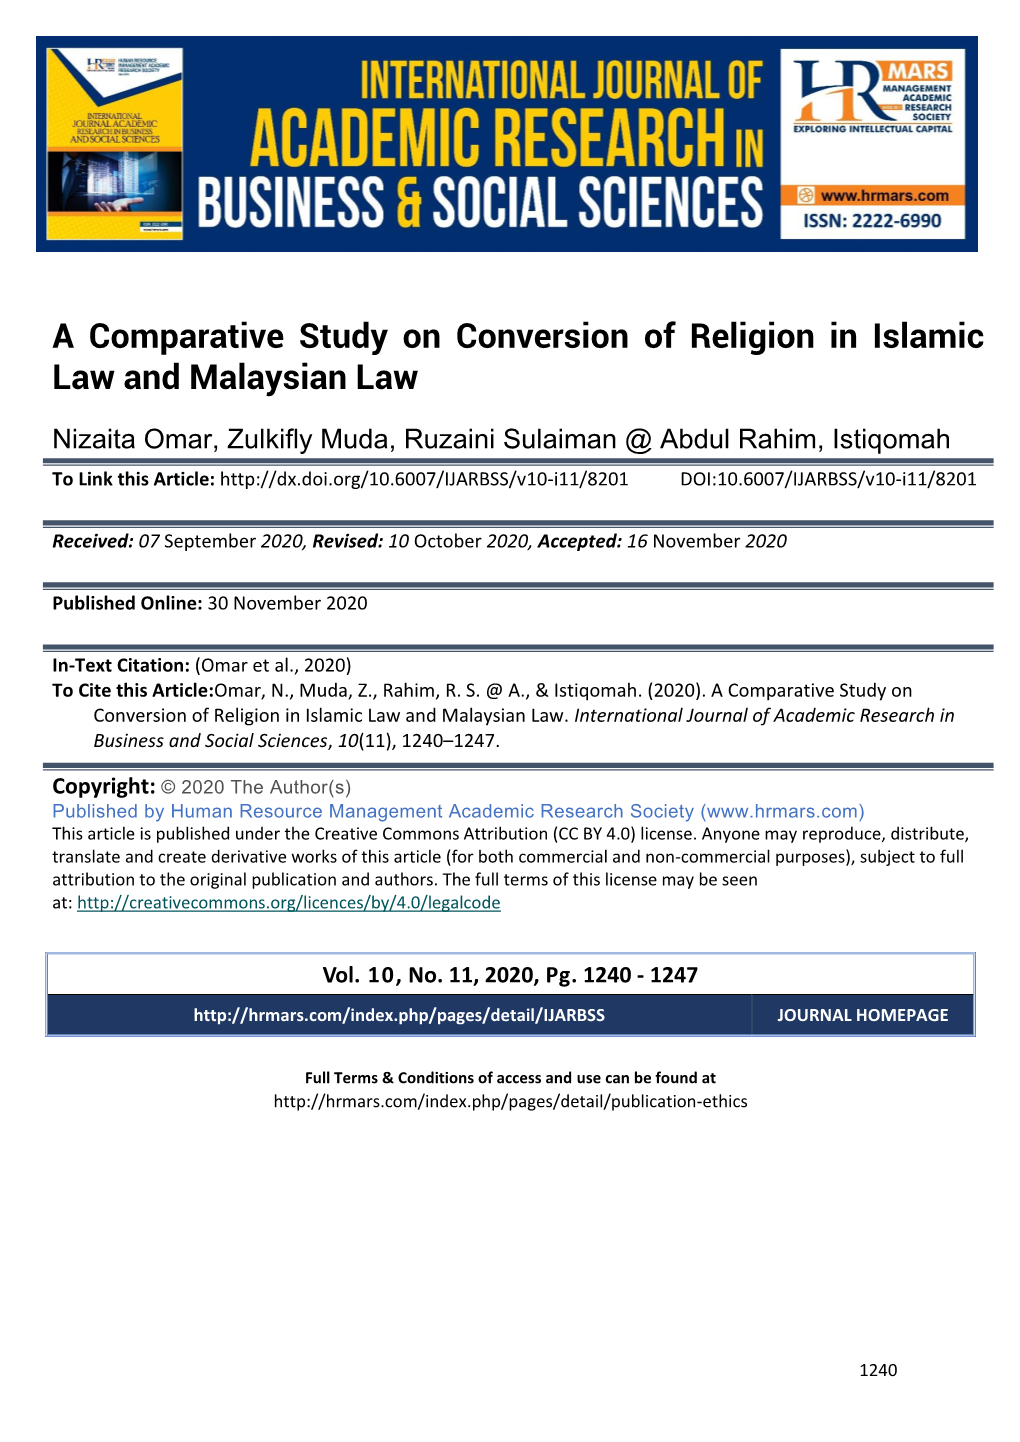 A Comparative Study on Conversion of Religion in Islamic Law and Malaysian Law